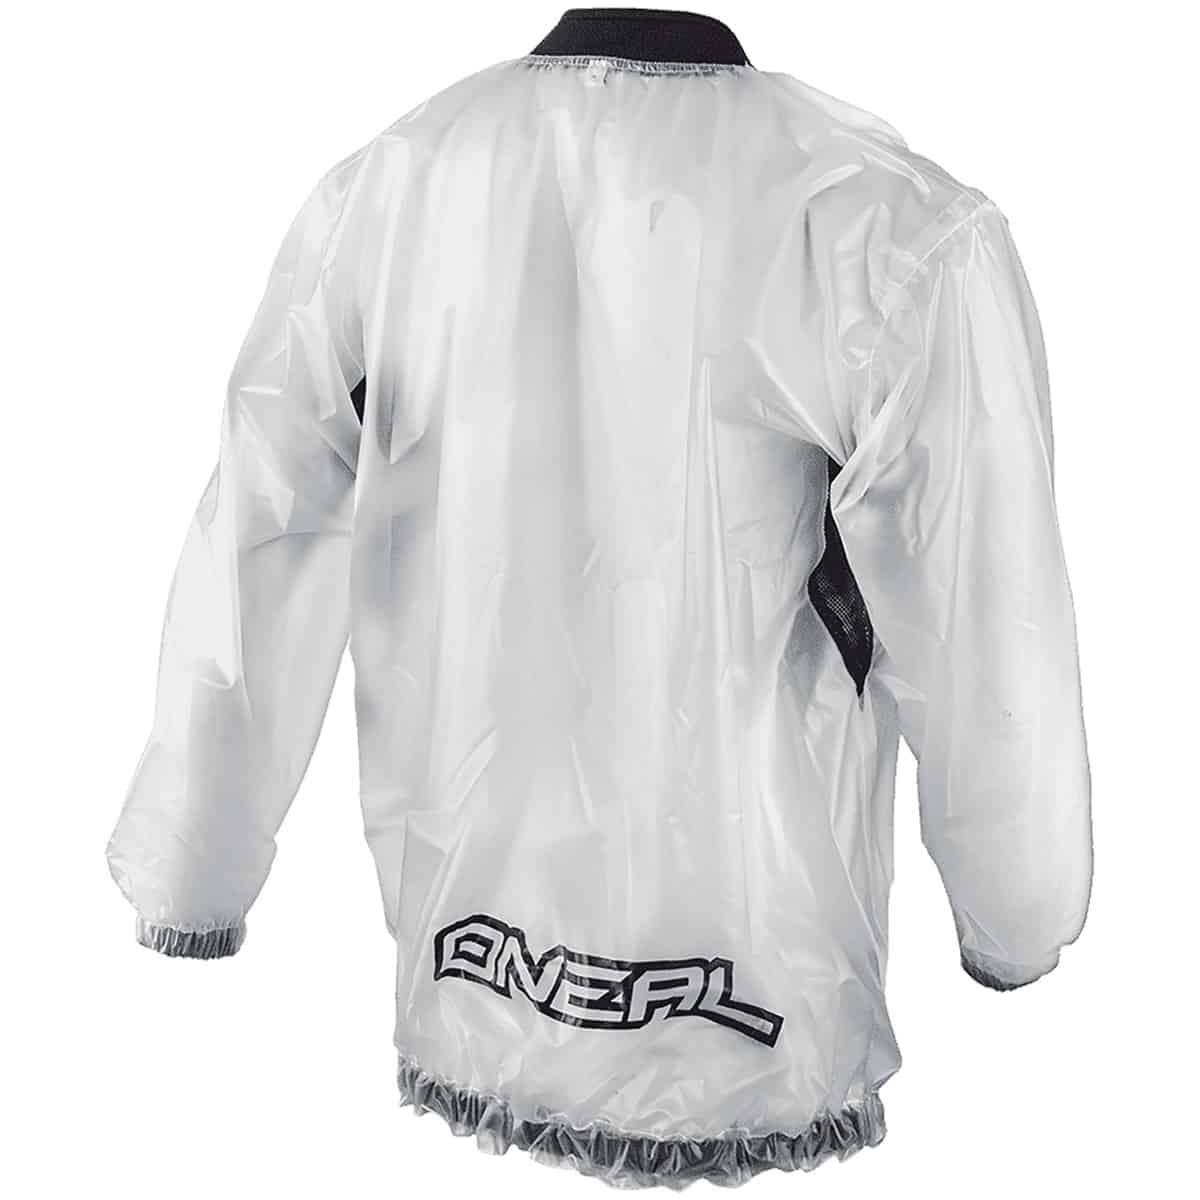 A transparent rain jacket to be worn on your offroad adventures. Protects you reliably from rain, wind and dirt-2